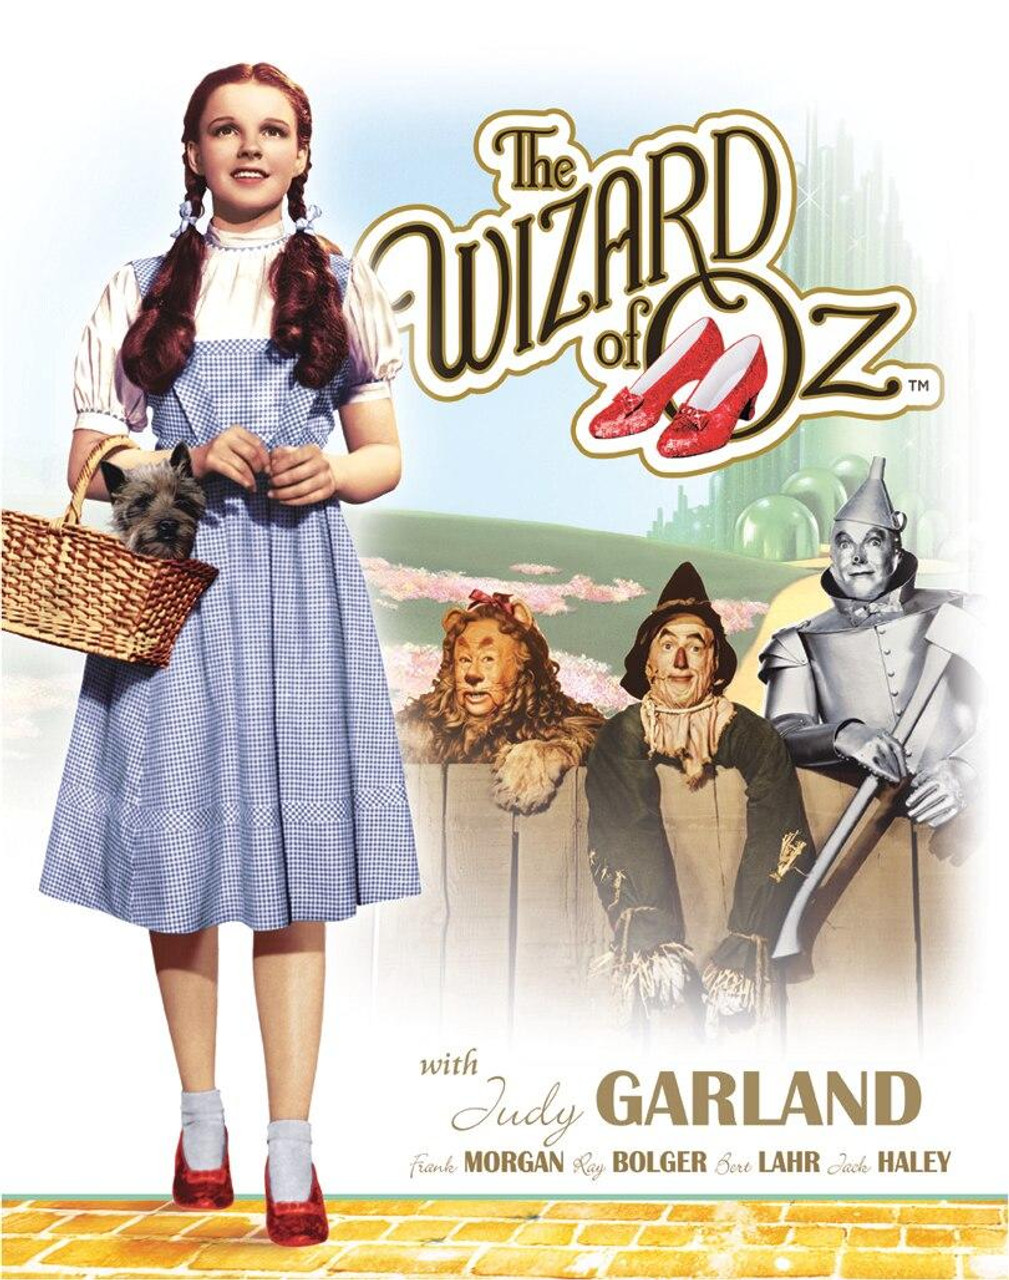 toto wizard of oz